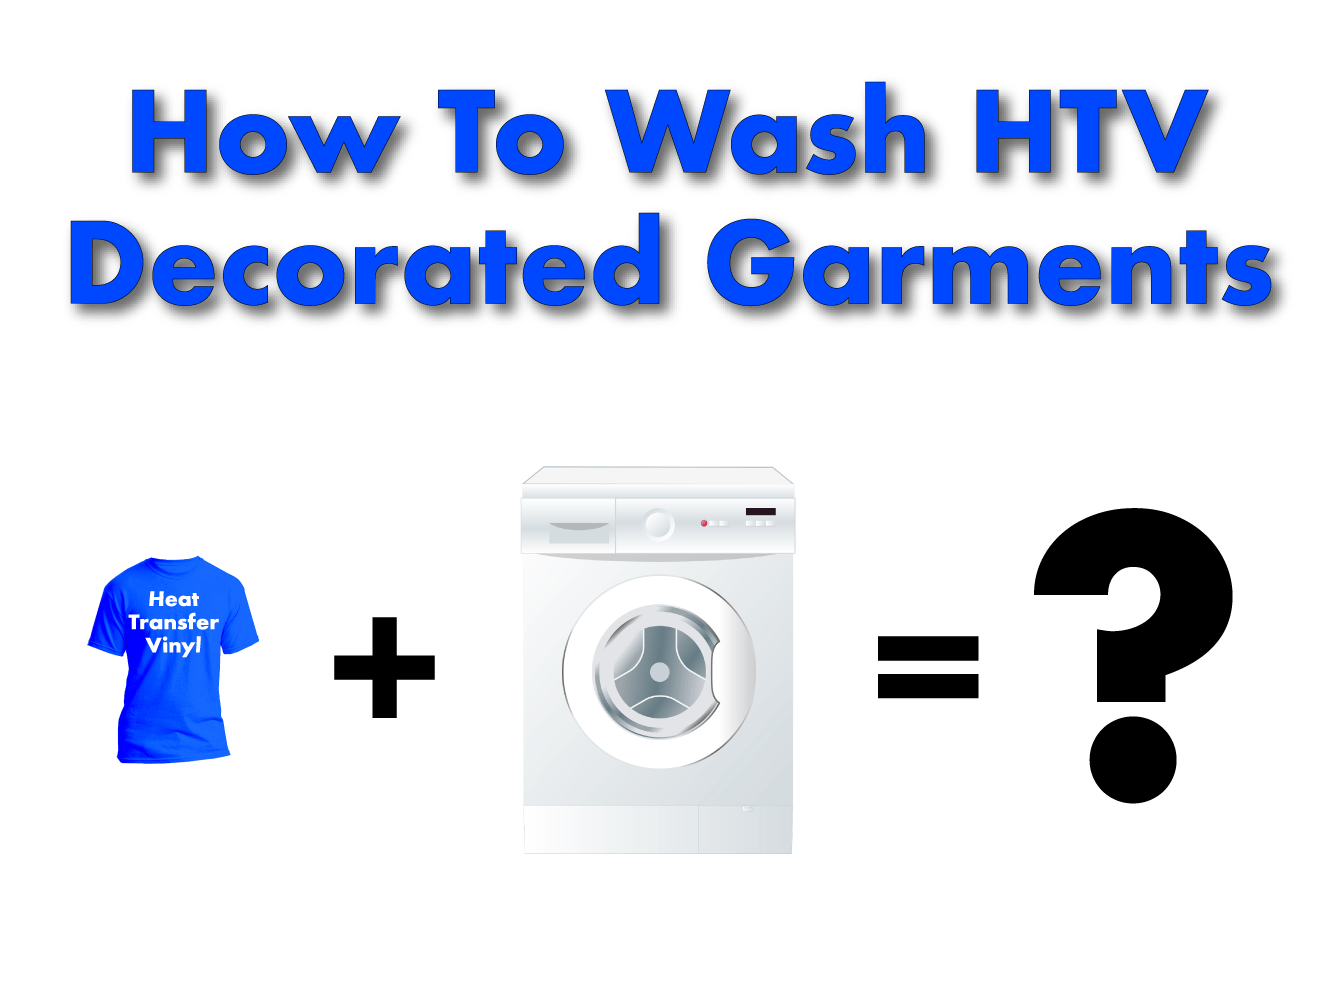 How To Wash HTV Decorated Garments